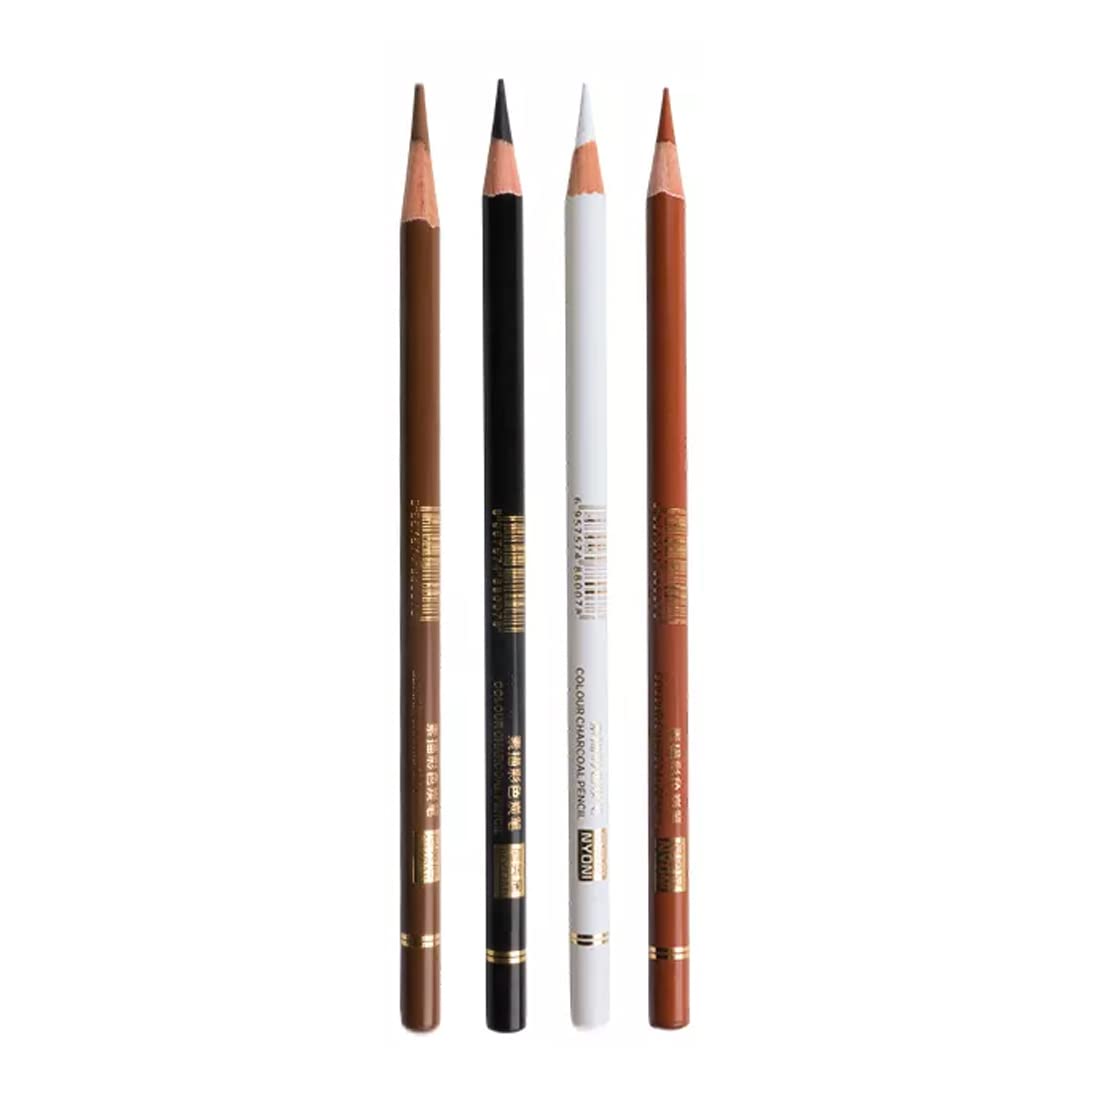 Ondesk Artics Artists' Fine Art Charcoal Drawing Medium Pencil Combo|1Black, 1White, 1Light Brown & 1Dark Brown For Artists', Professionals & Students|Ideal For Drawing, Sketching & Shading|Pack of 4